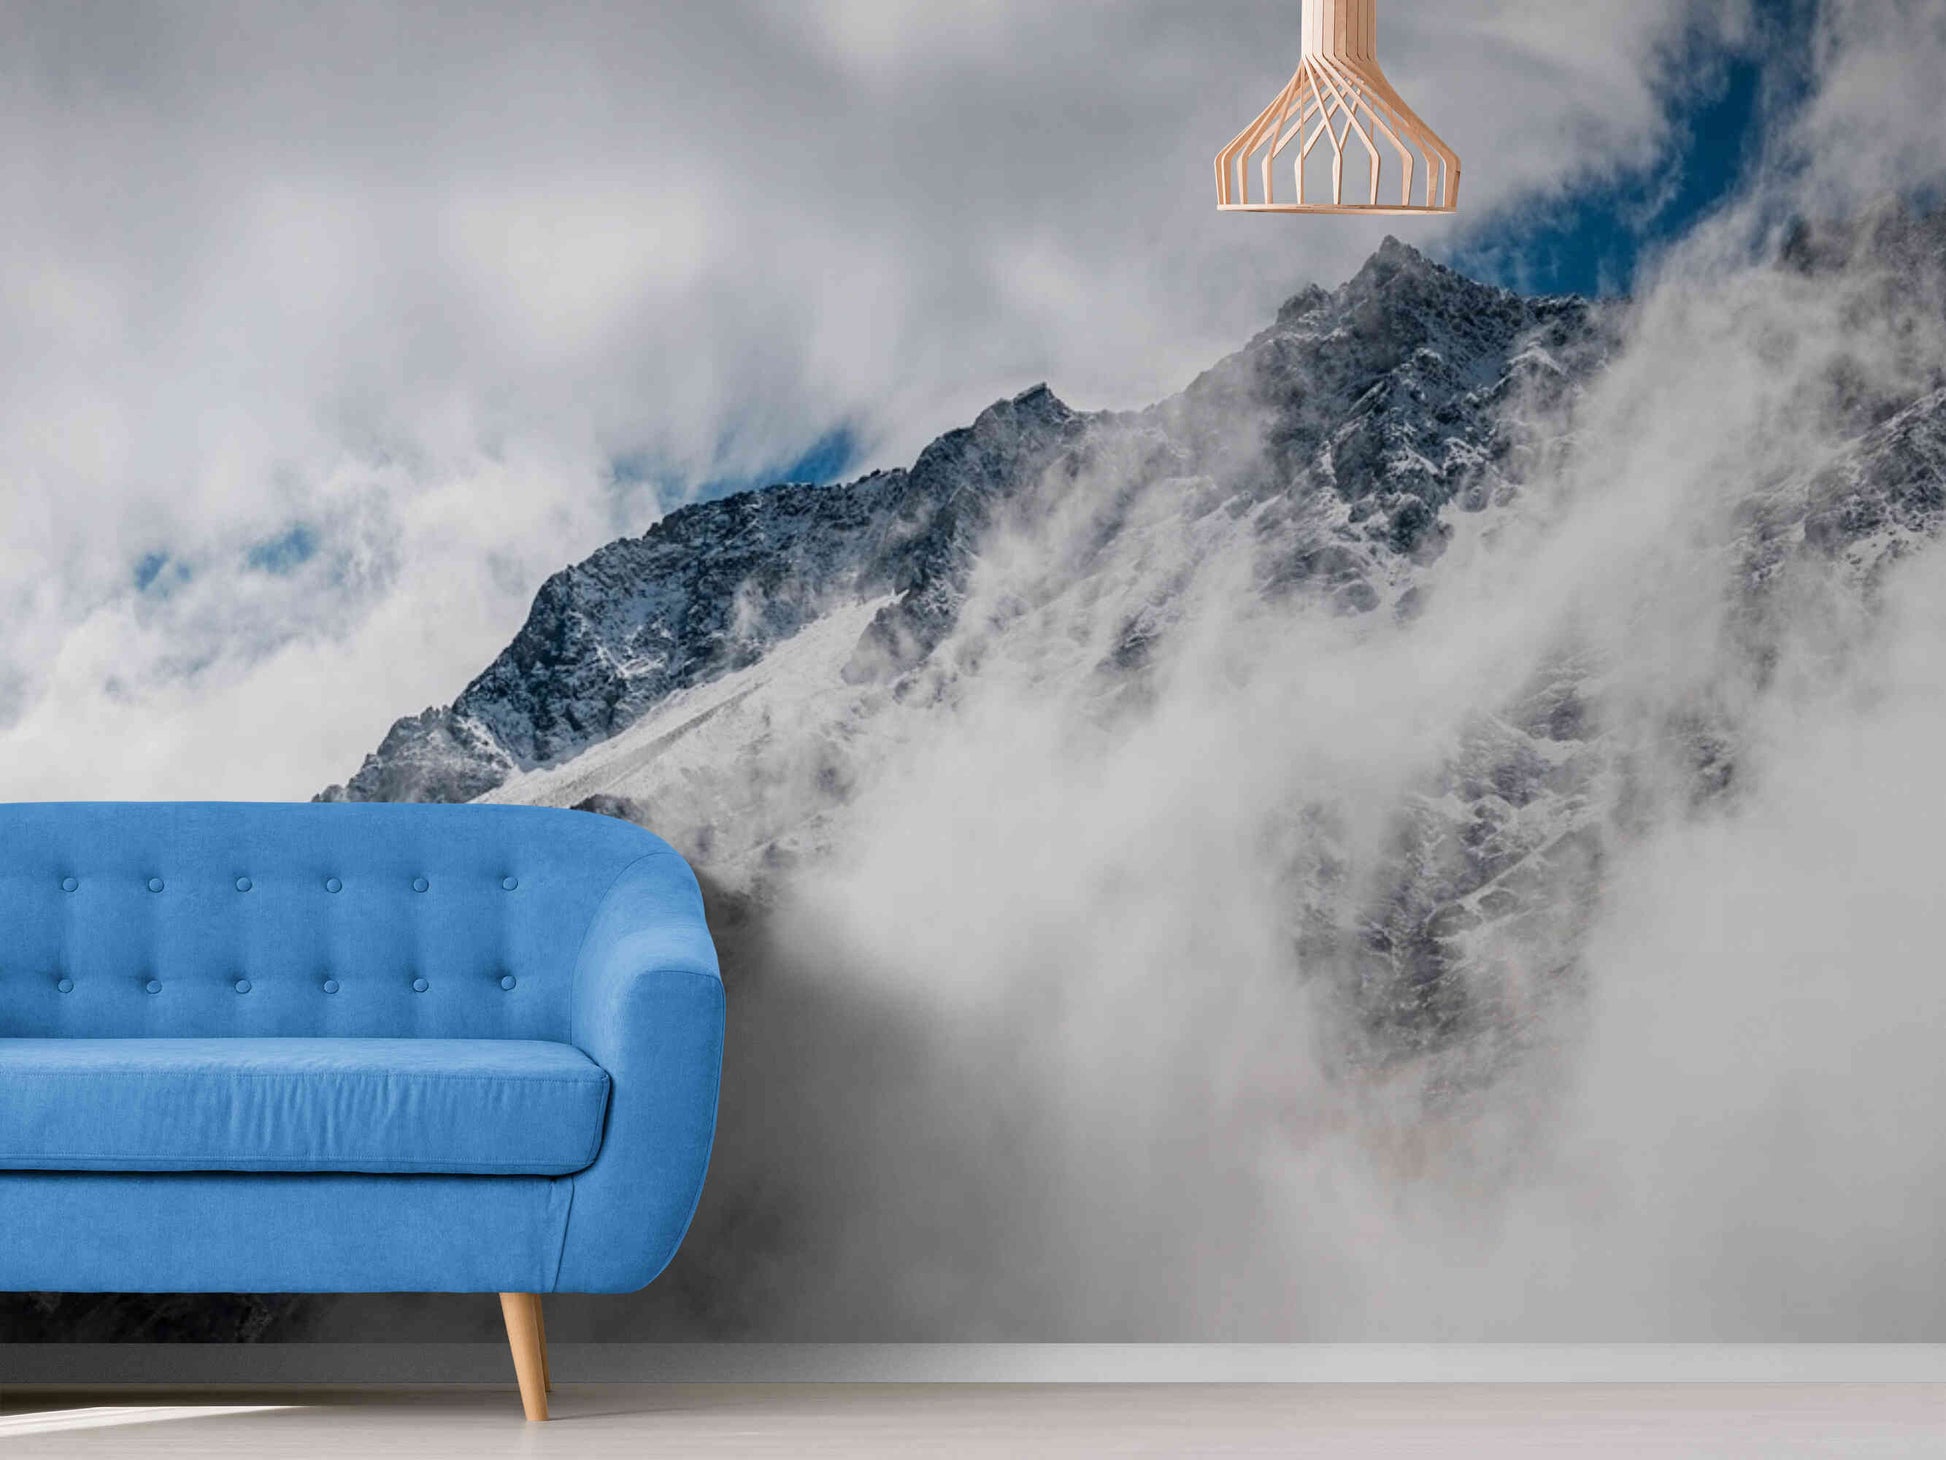 Majestic mountains view in our wall mural, transforming rooms into natural sanctuaries.